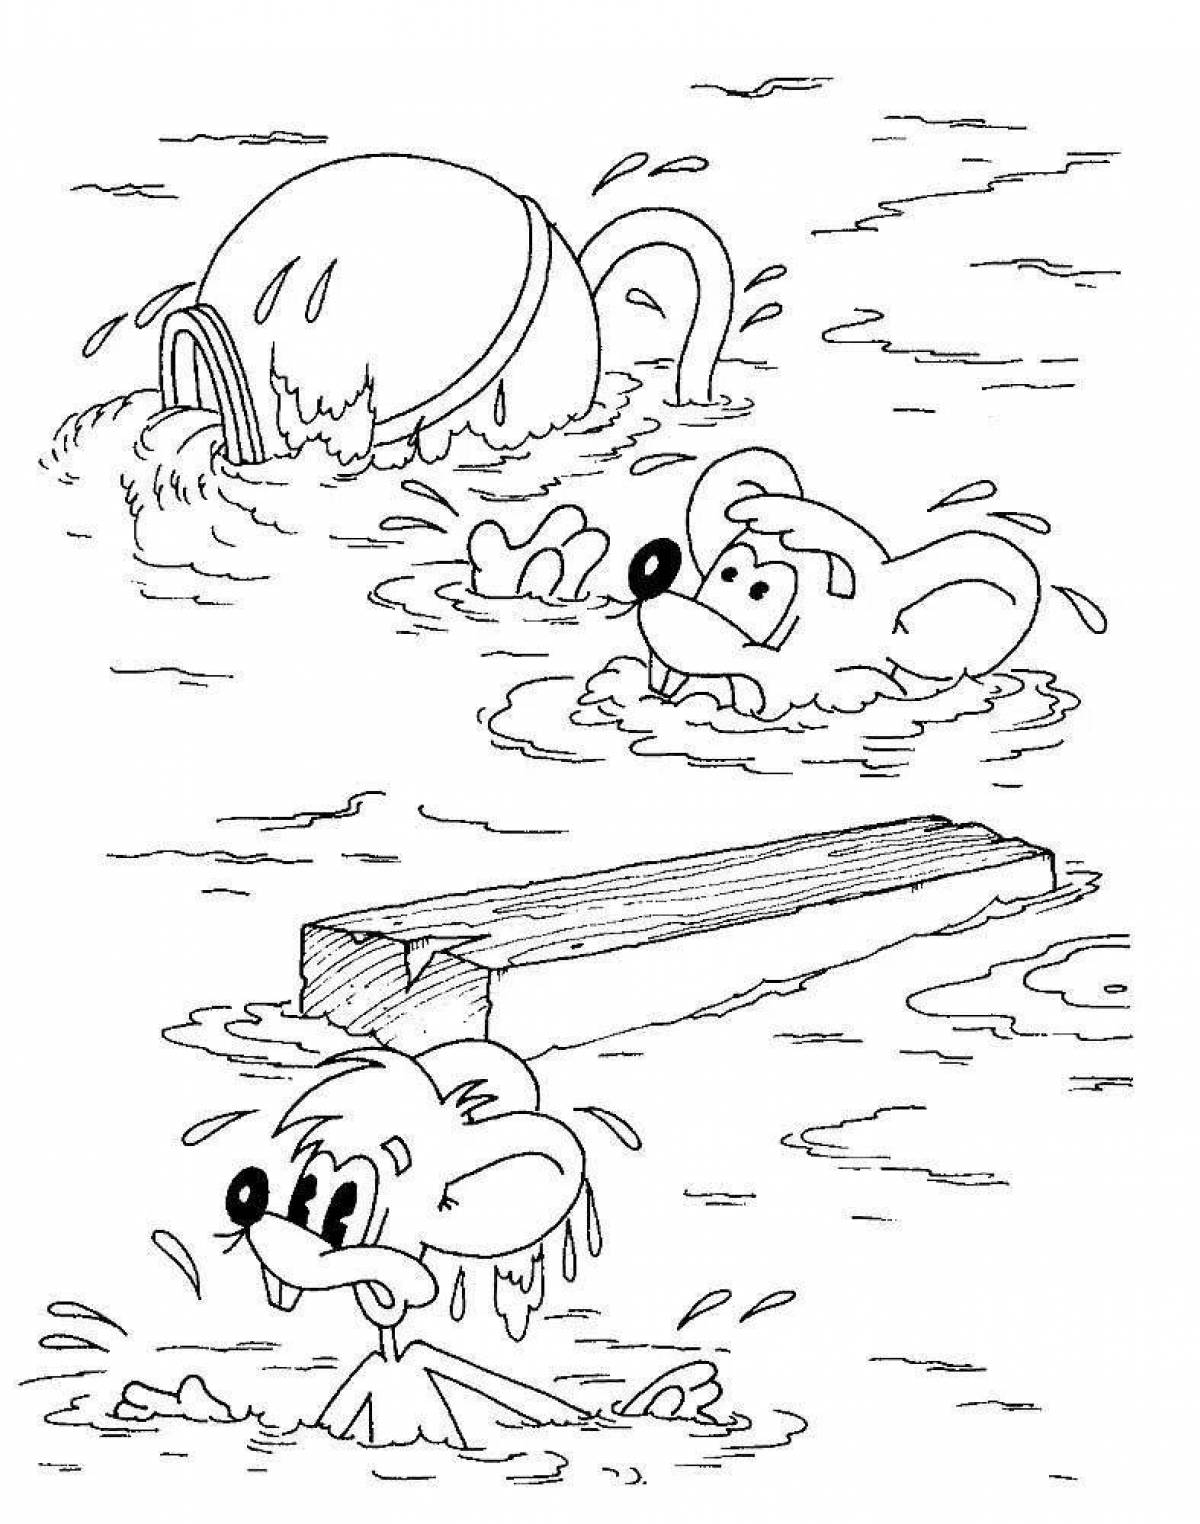 Water safety coloring page